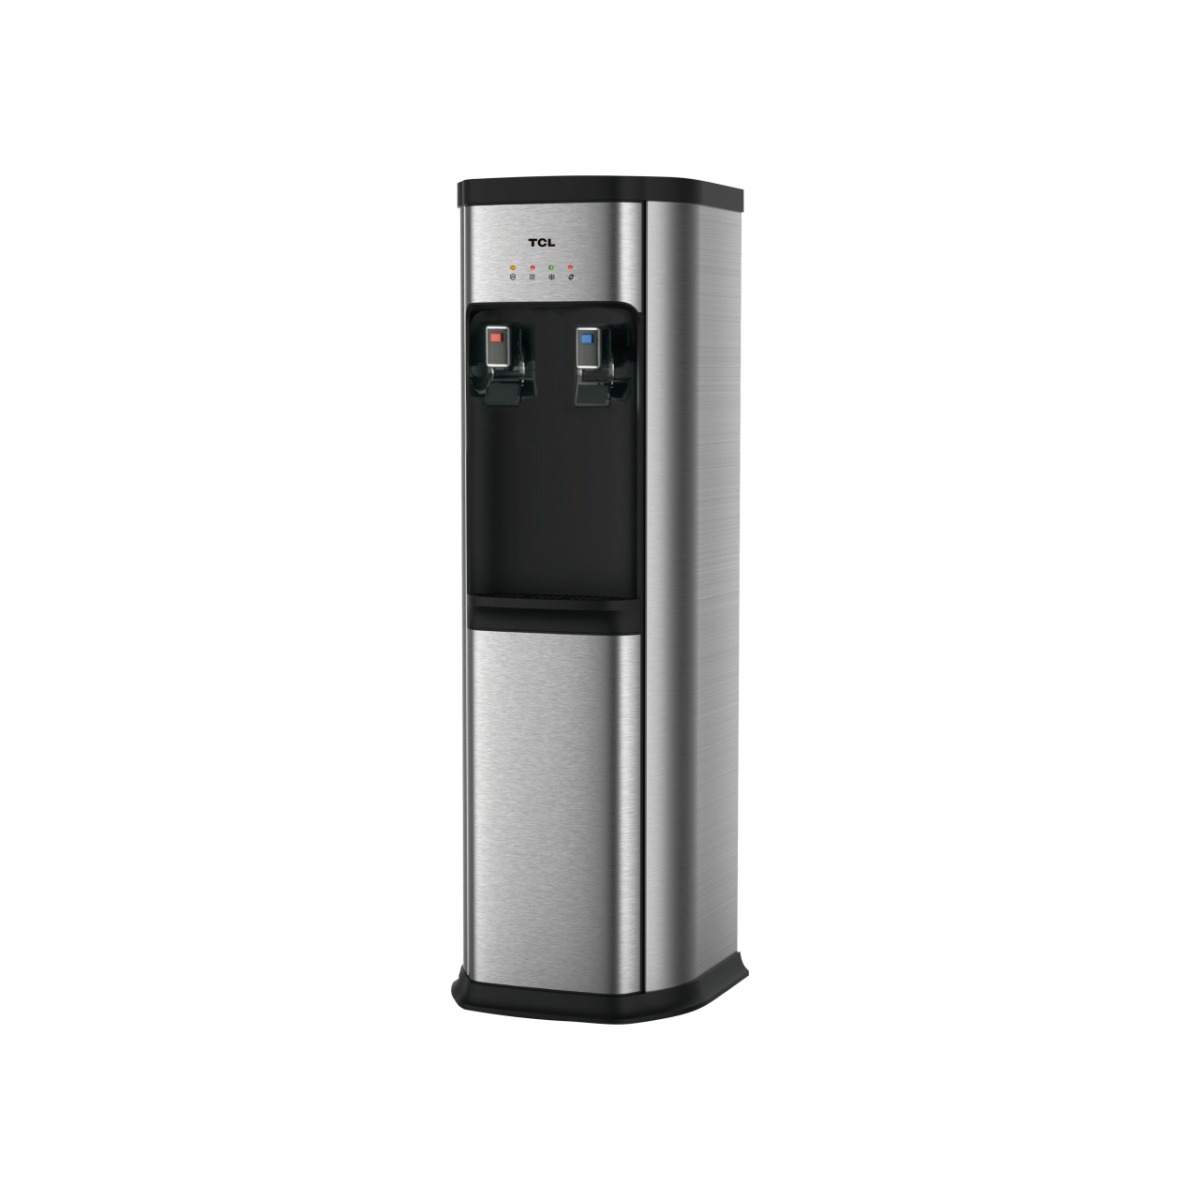 Tcl Stand Water Cooler, 2 Hot And Cold Bubbles, Bottle Holder On Top, Cooling Capacity 2.5 Liters Per Hour, Heating Up To 4 Liters, Silver,TY-LYR98